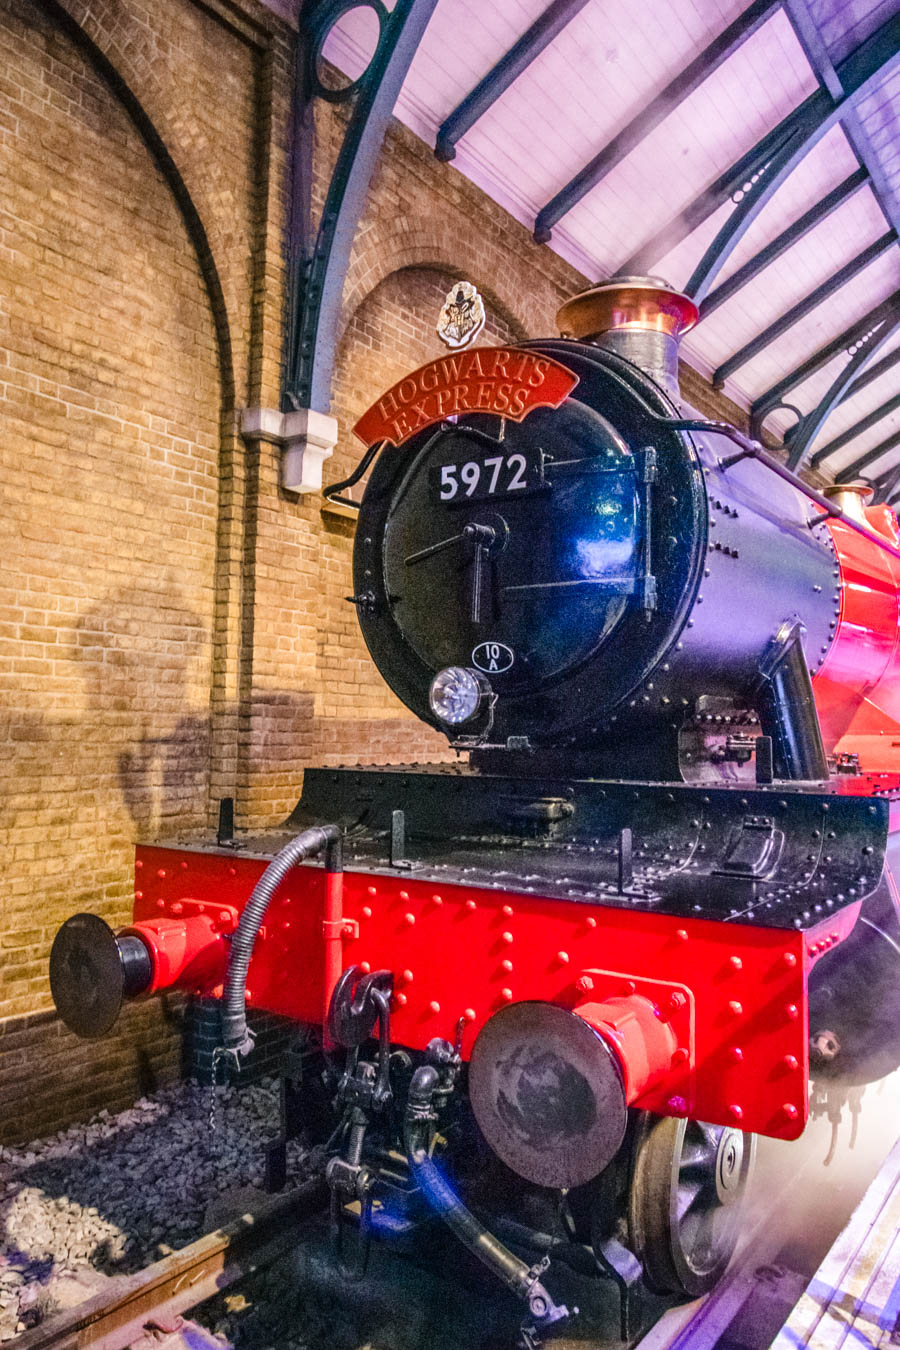 Ultimate Harry Potter London itinerary including the best Harry Potter things to do in London. This itinerary is perfect for any potterhead planning a Harry Potter trip to London. | Harry Potter UK | London Harry Potter Things to do | Harry Potter Vacation | UK Travel | London Travel